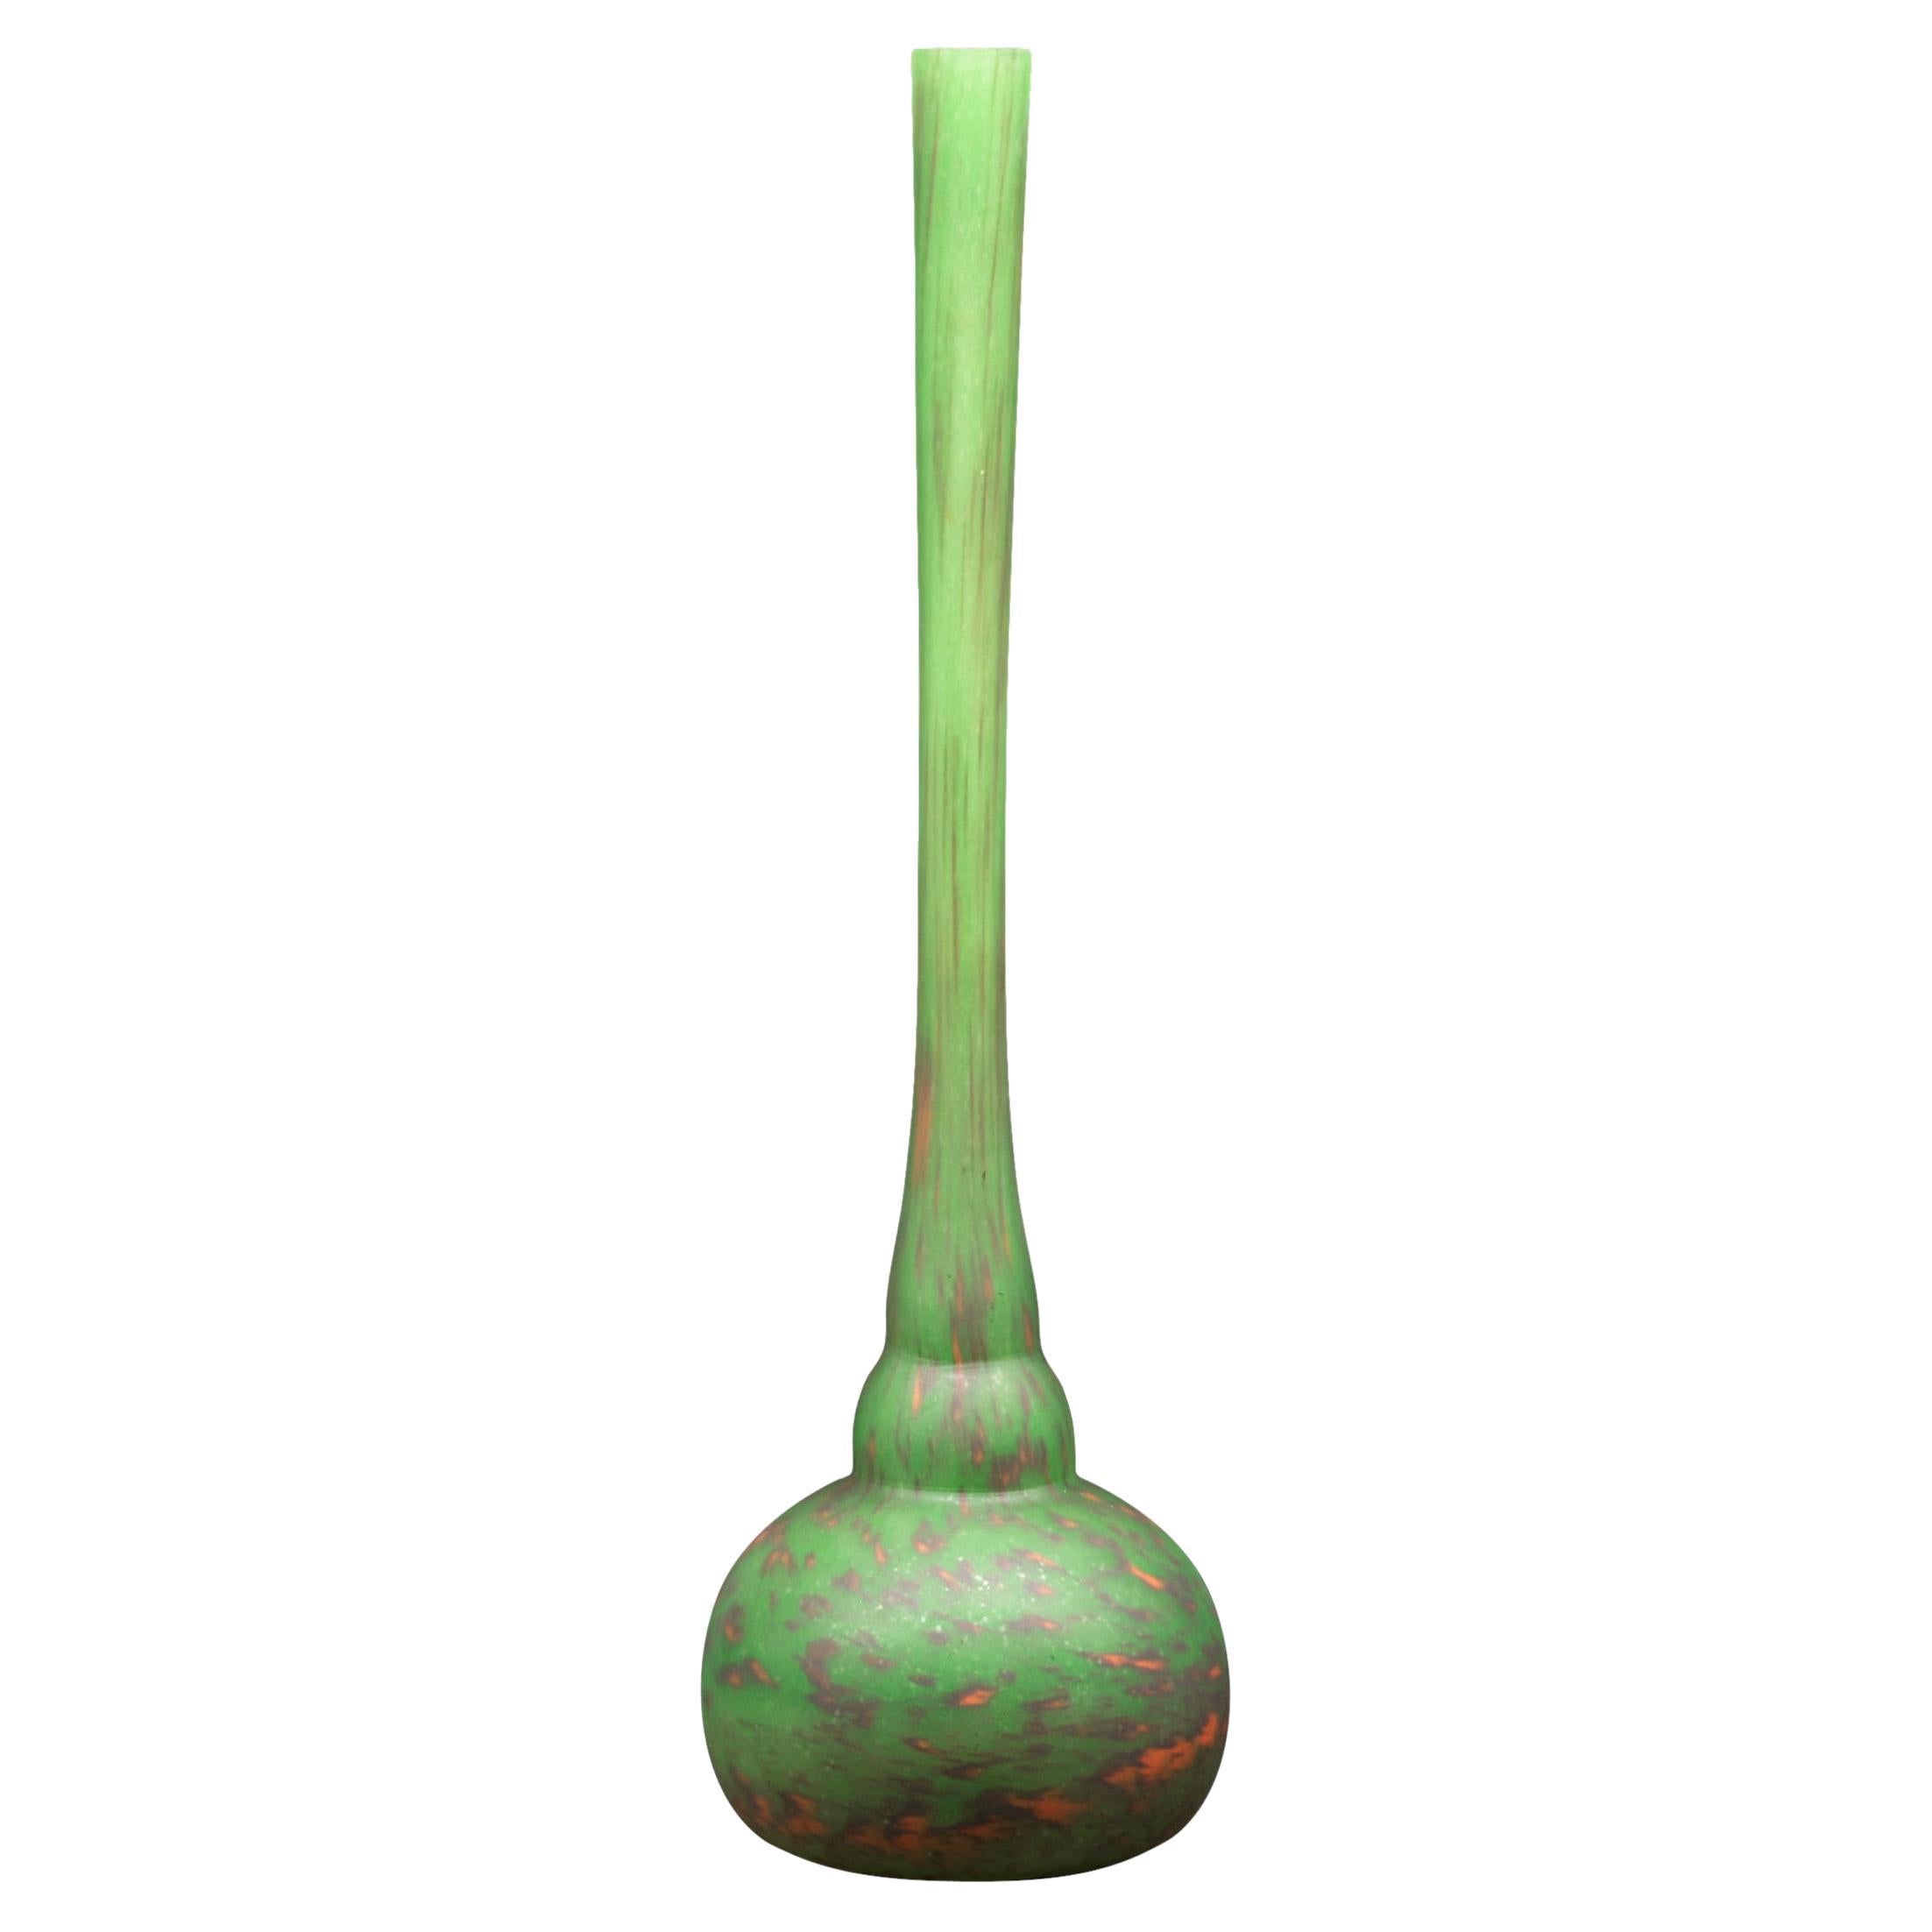 DAUM French Art Deco Single-Flower Vase, Late 1920s For Sale